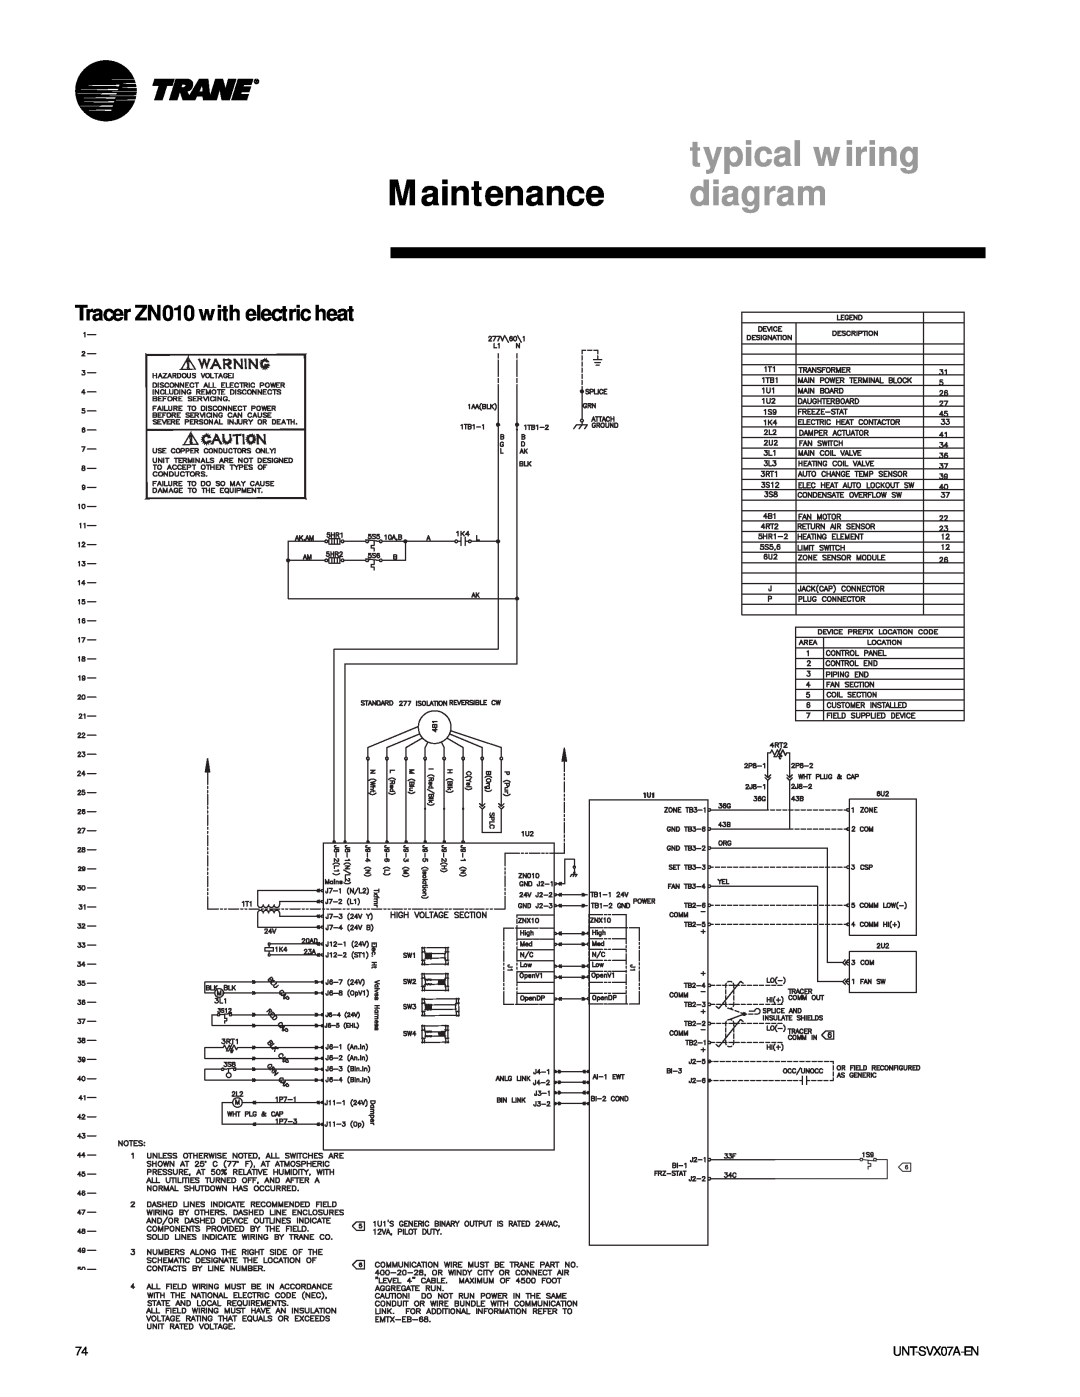 Trane UNT-SVX07A-EN manual Tracer ZN010 with electric heat, typical wiring, Maintenance diagram 